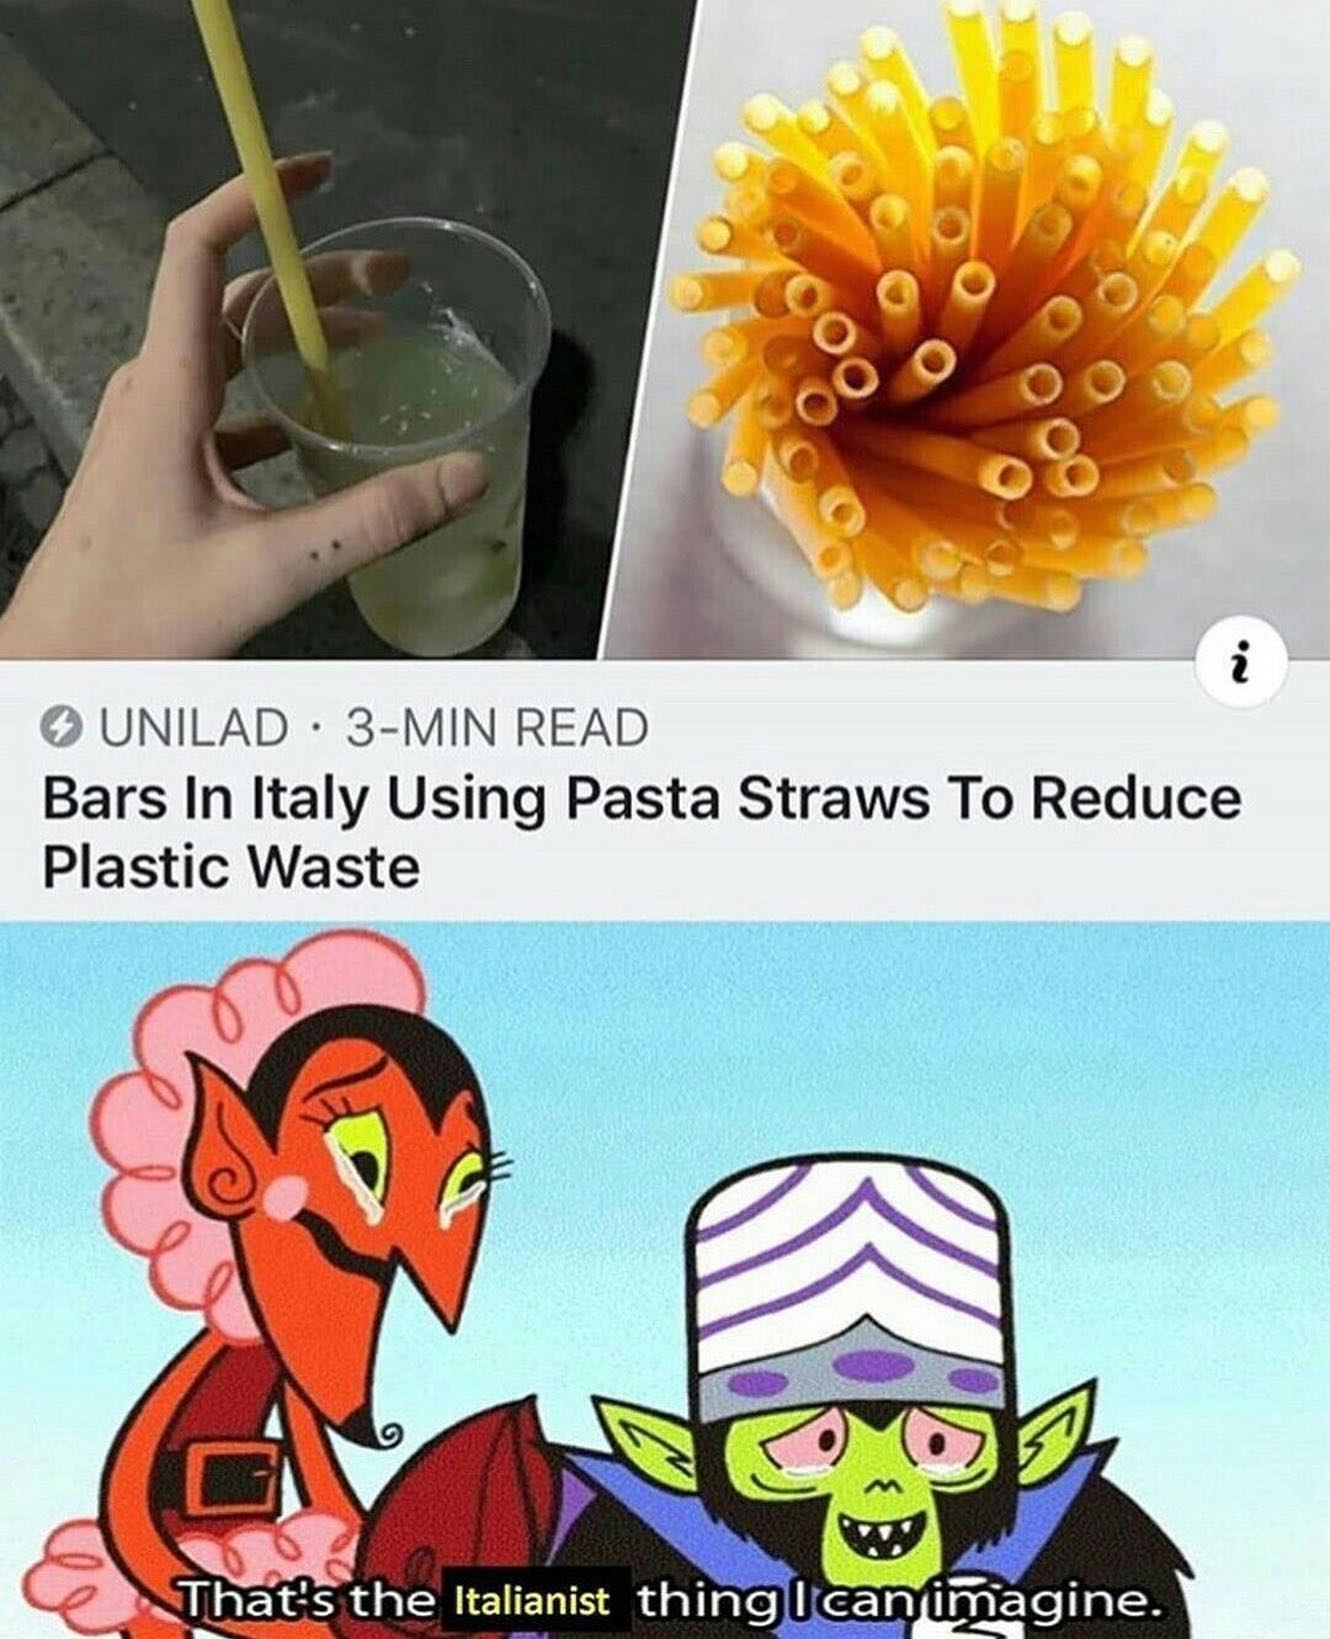 dank memes - italy pasta straws - 8 Unilad 3Min Read Bars In Italy Using Pasta Straws To Reduce Plastic Waste That's the Italianist thing I can imagine.